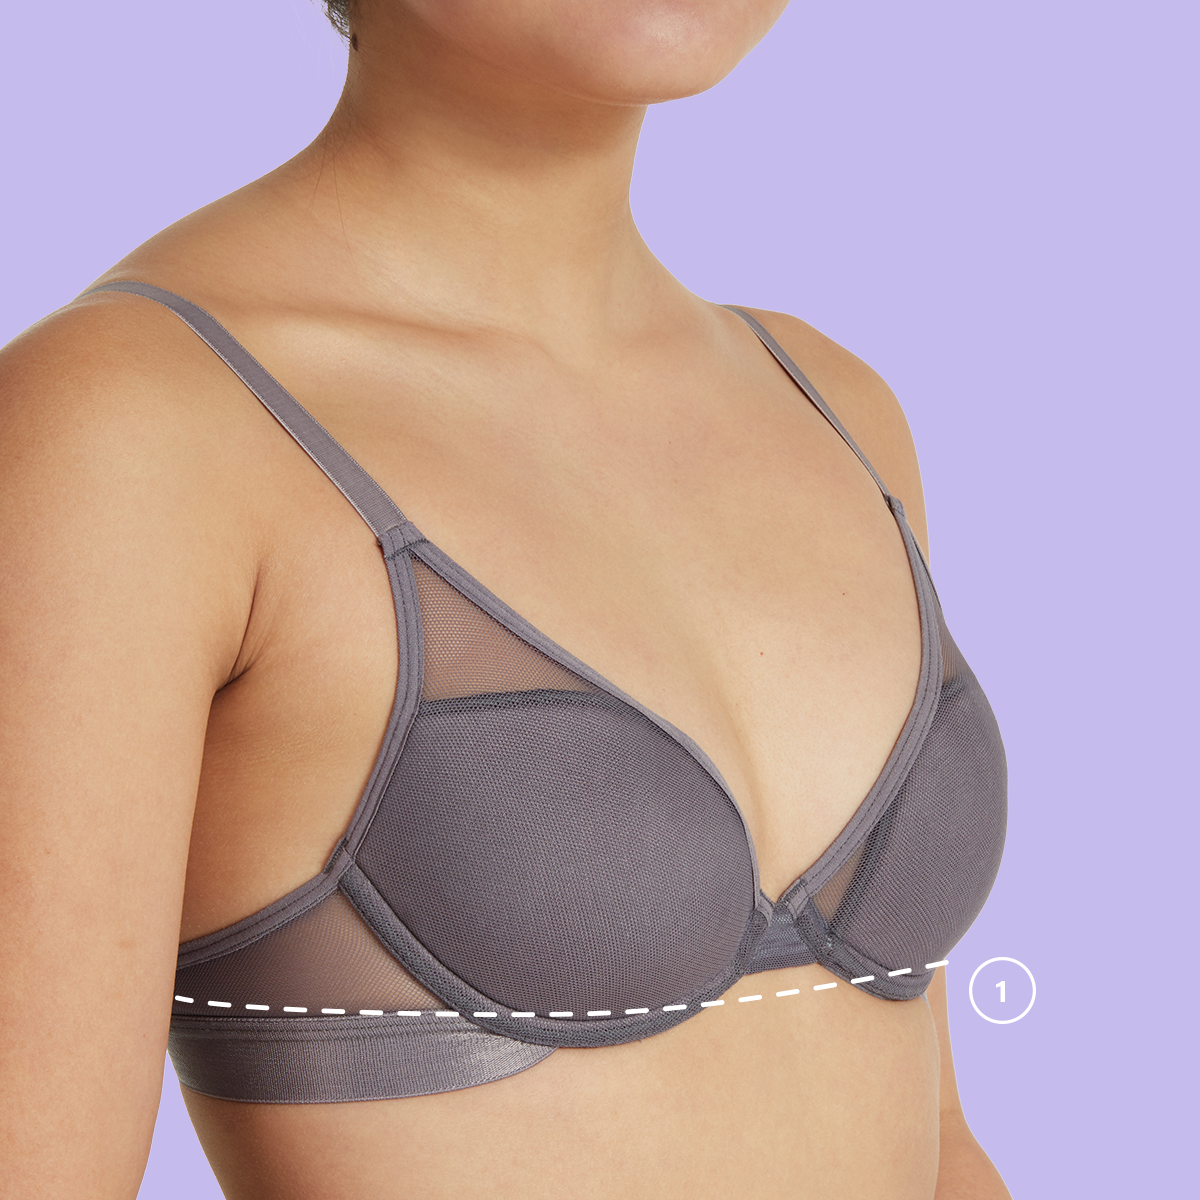 Bra Sister Sizes: Why Every Woman Should Know for Bra Fitting